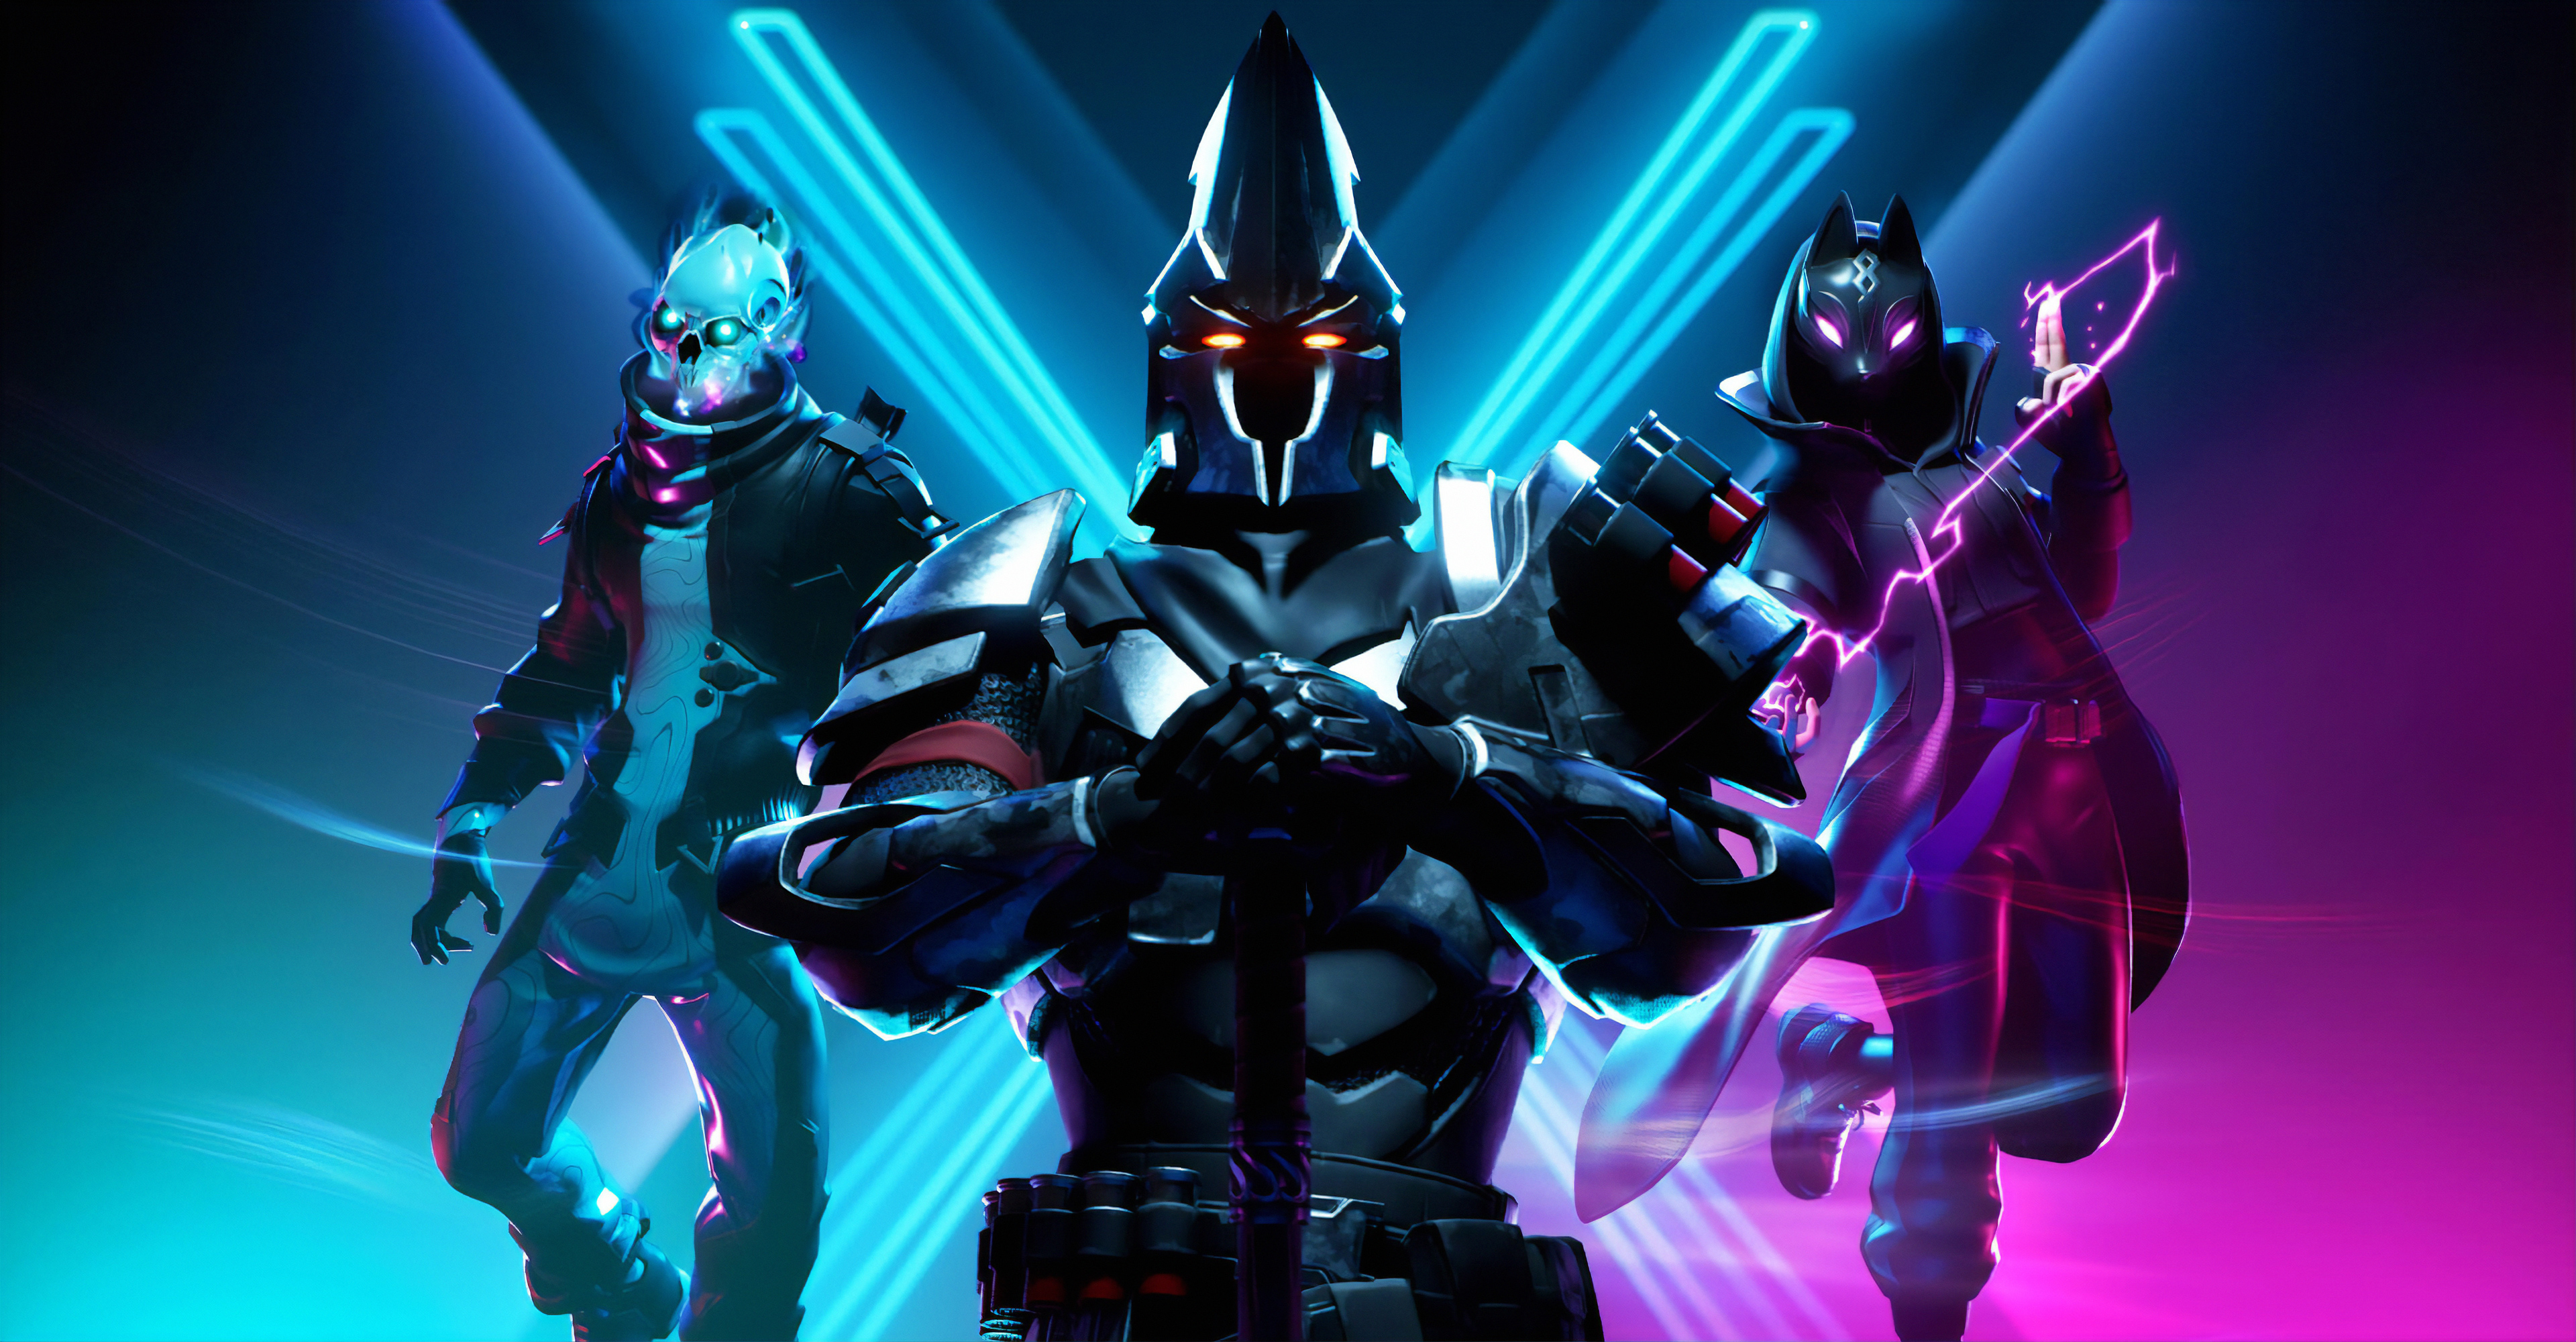 New Fortnite Battle Royale Season Wallpaper Hd Games 4k Wallpapers Images Photos And Background Wallpapers Den